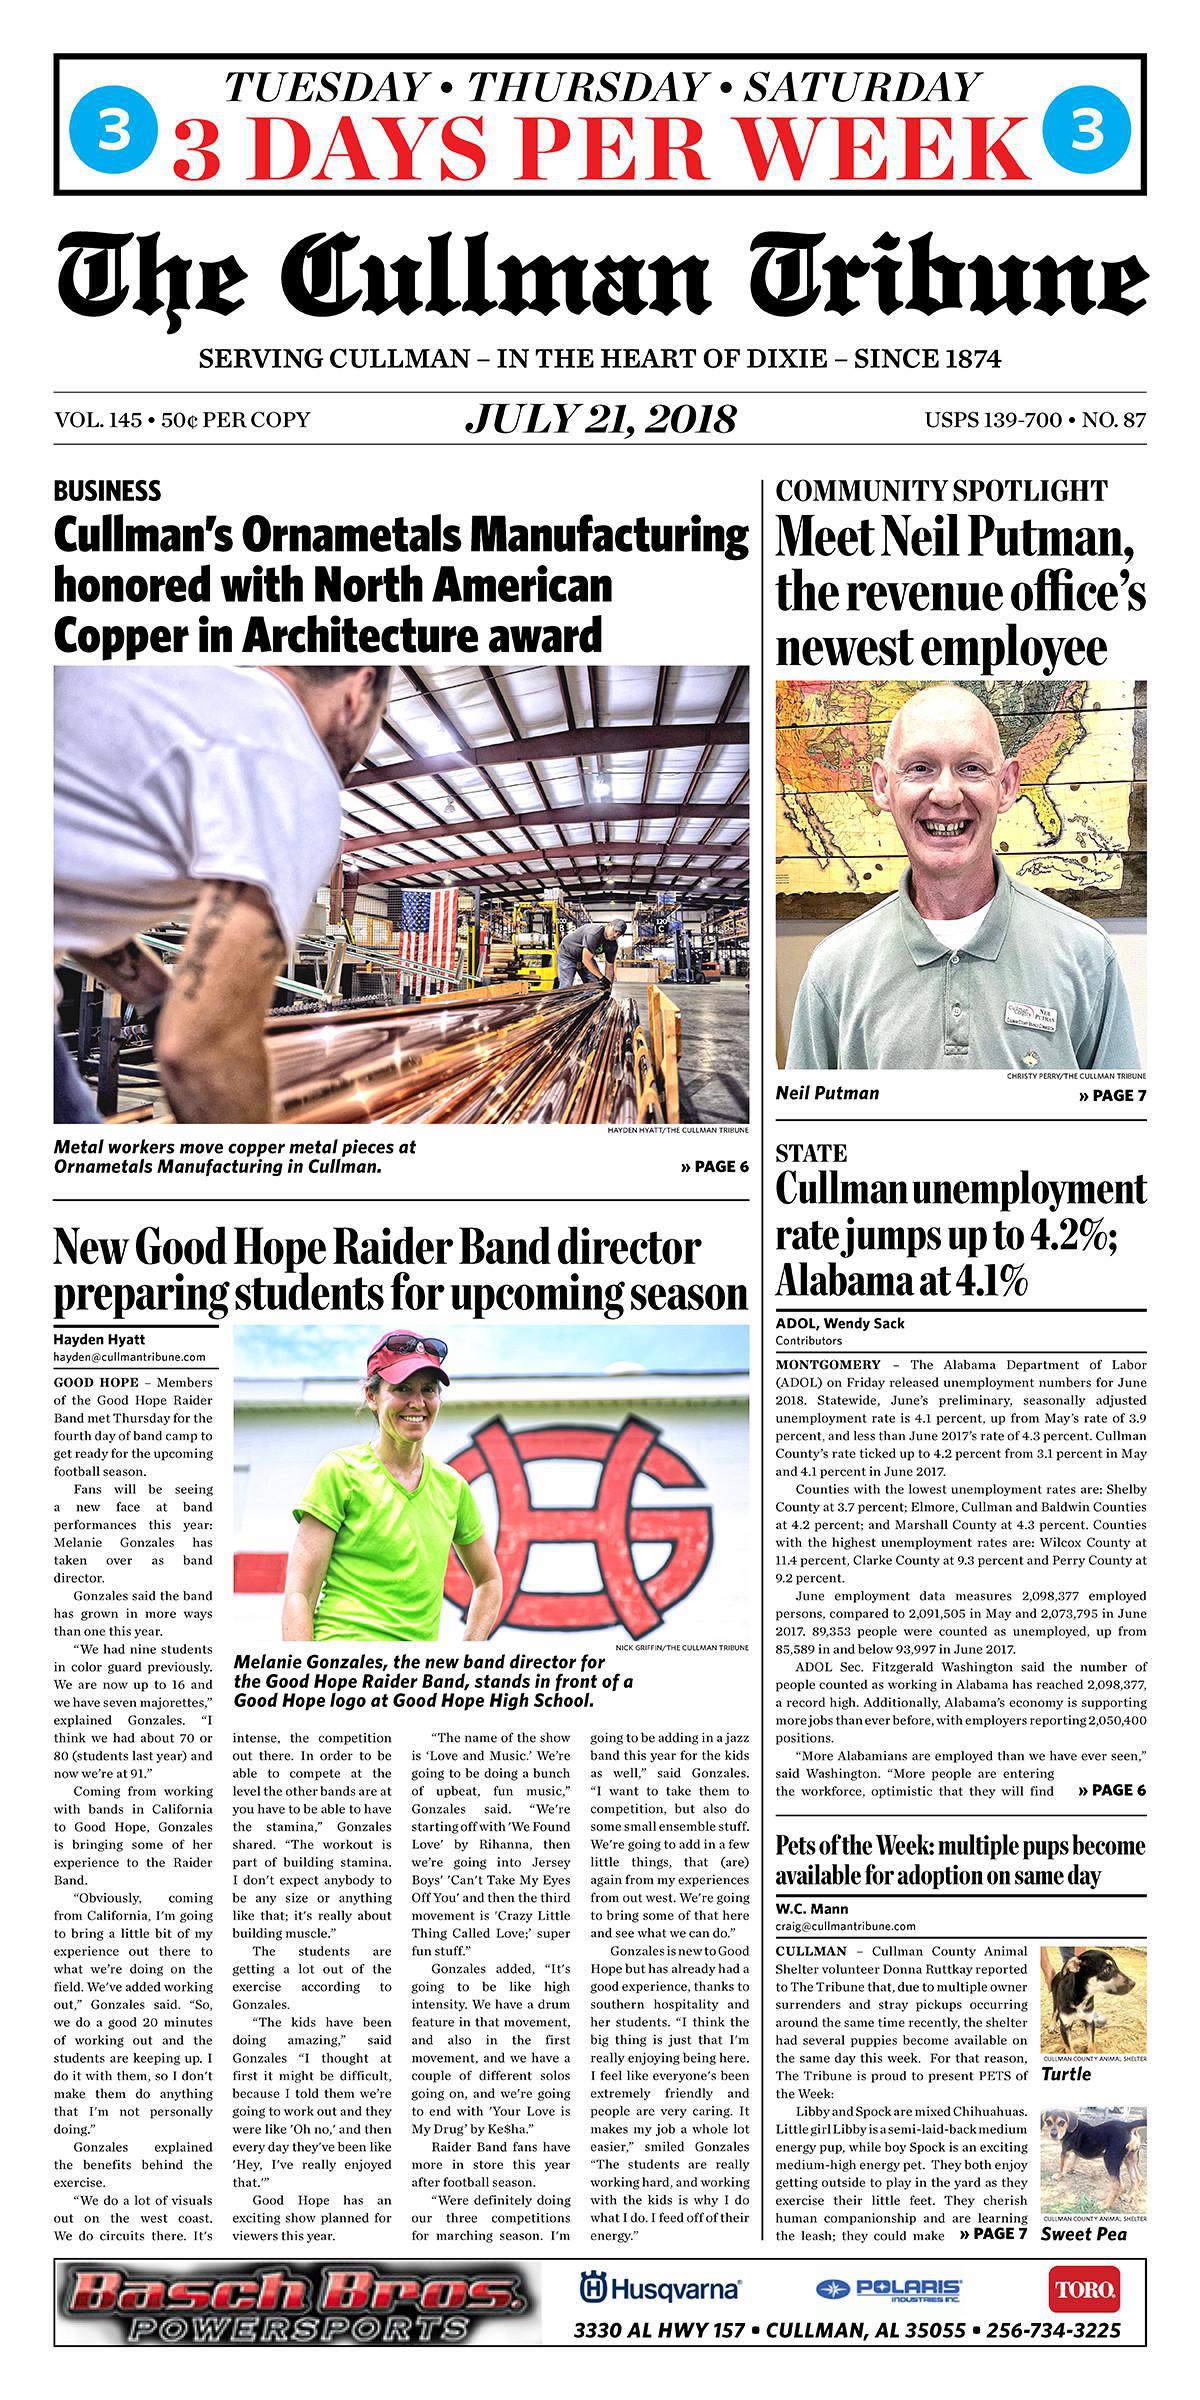 Good Morning Cullman! The 07-21-2018 edition of the Cullman Tribune is now ready to view